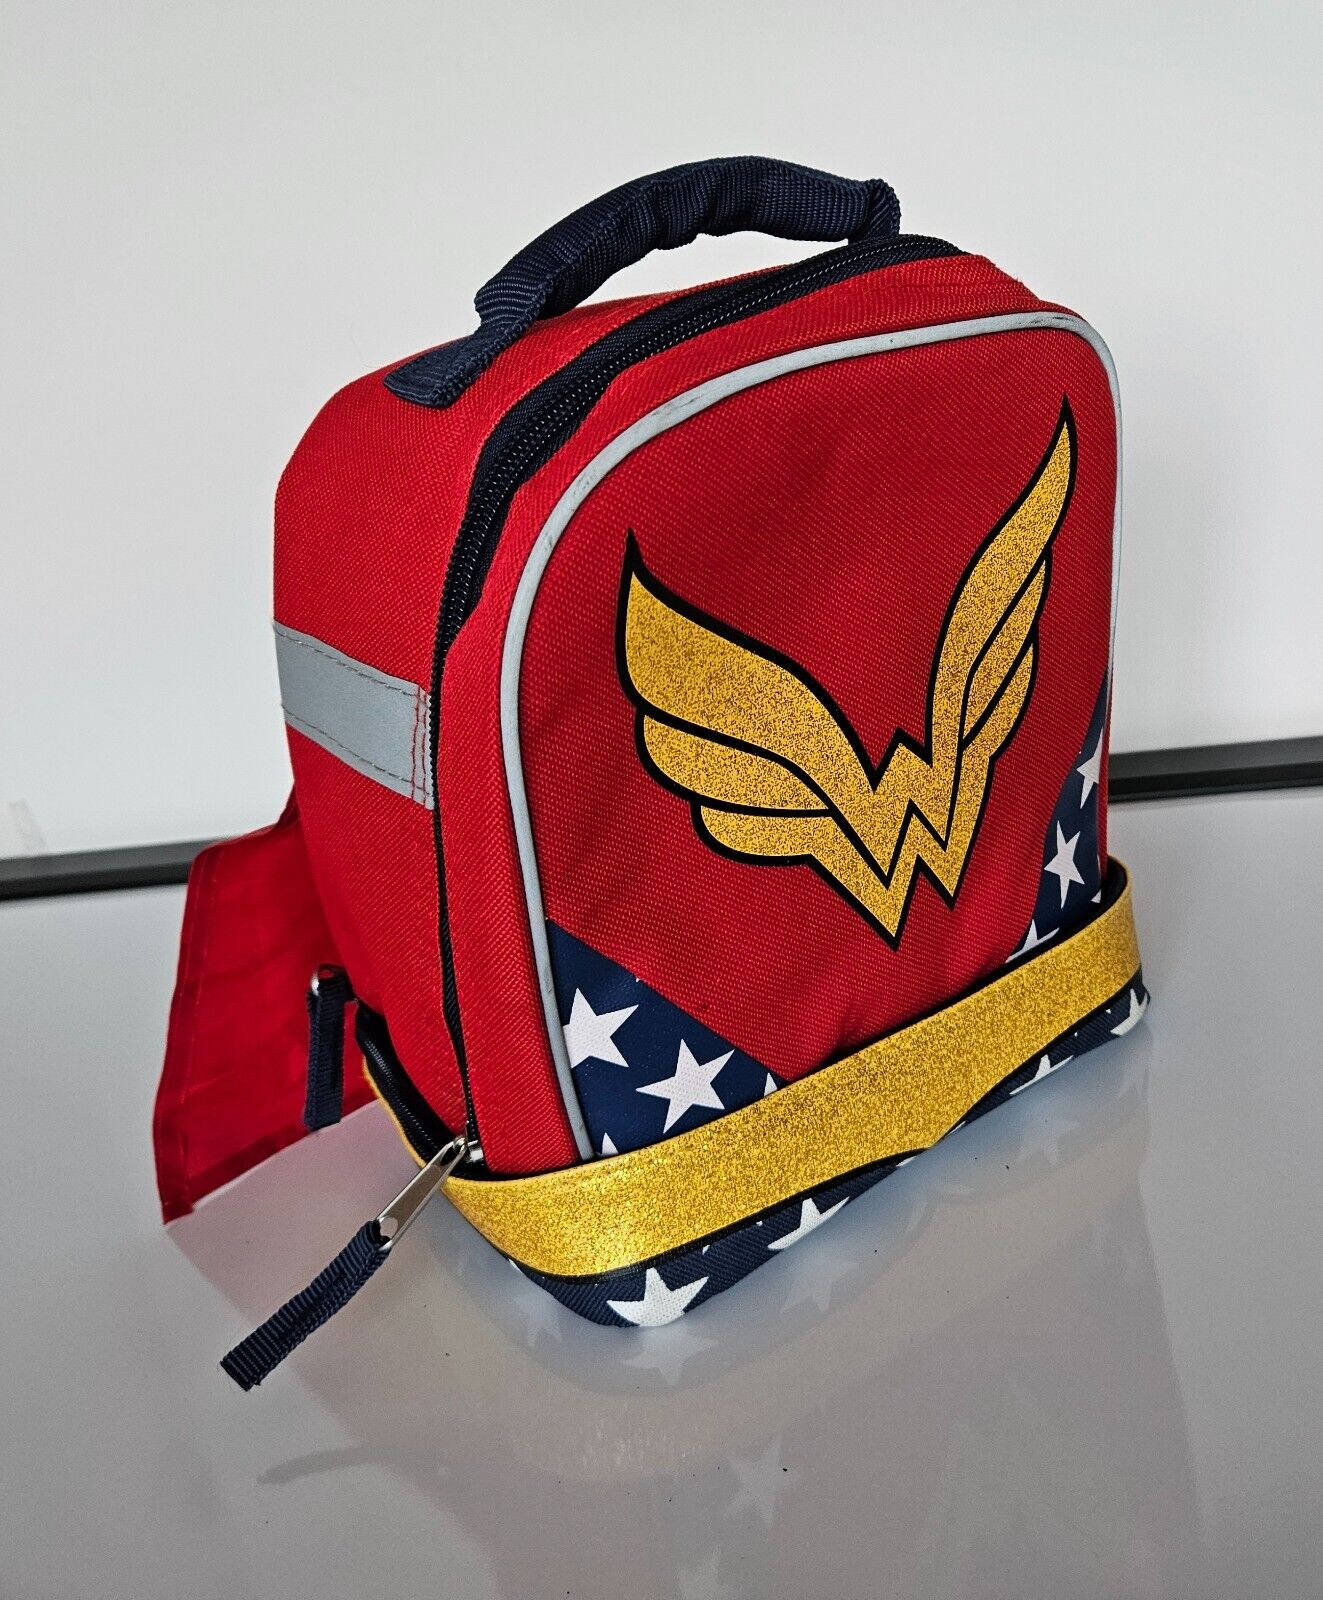 Wonder Woman Lunch box with Cape - about 9 inches